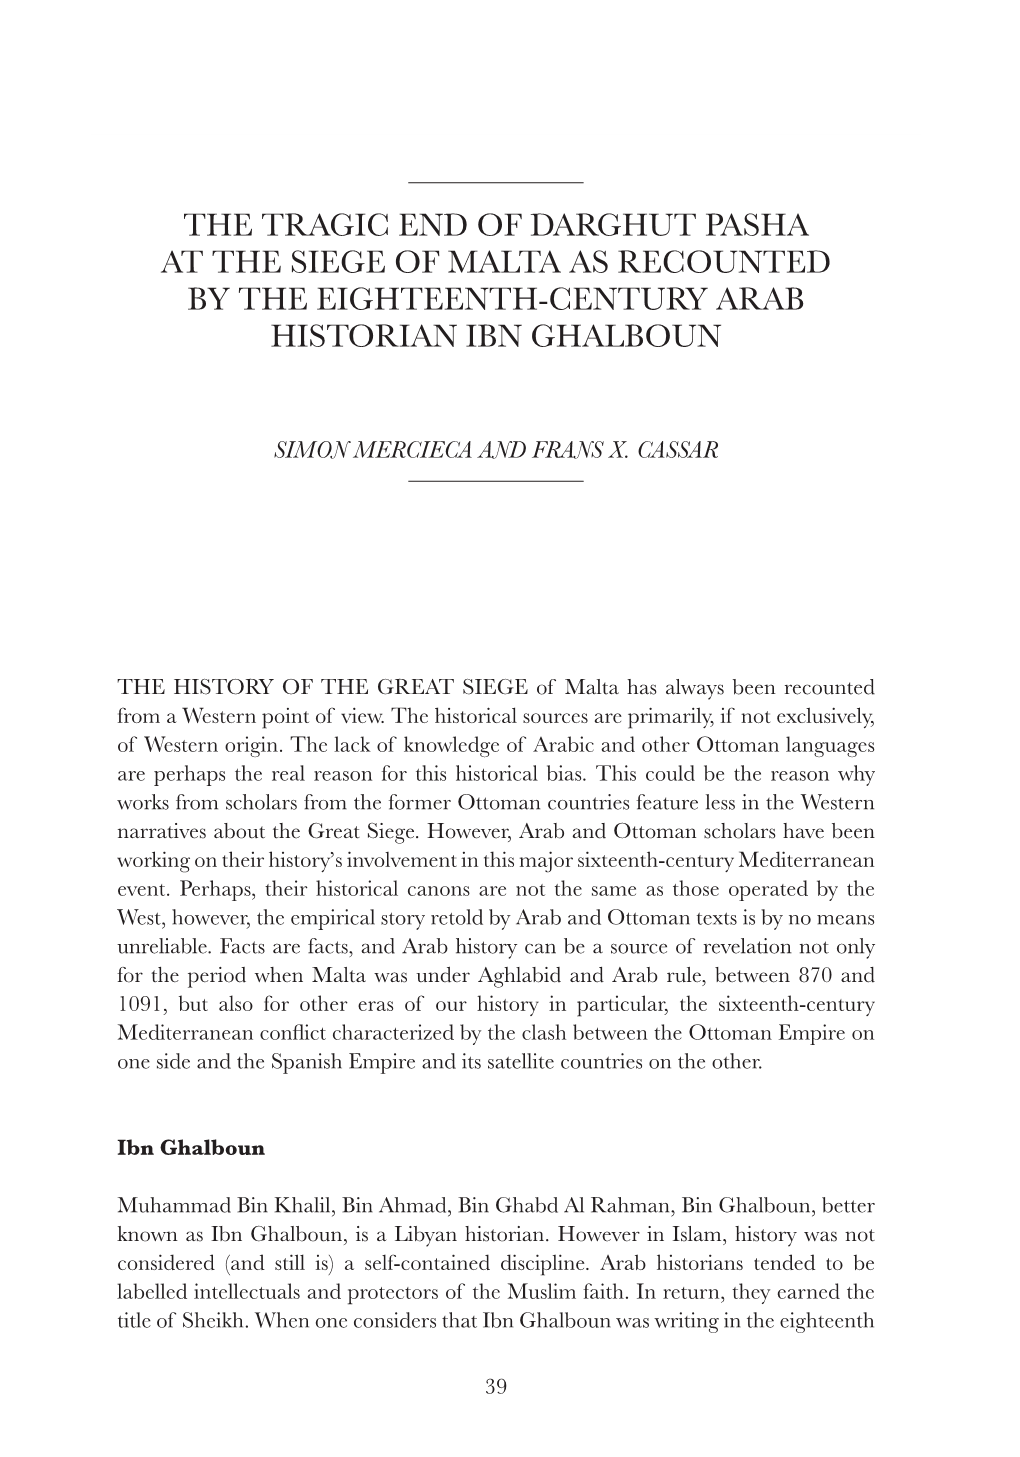 The Tragic End of Darghut Pasha at the Siege of Malta As Recounted by the Eighteenth-Century Arab Historian Ibn Ghalboun